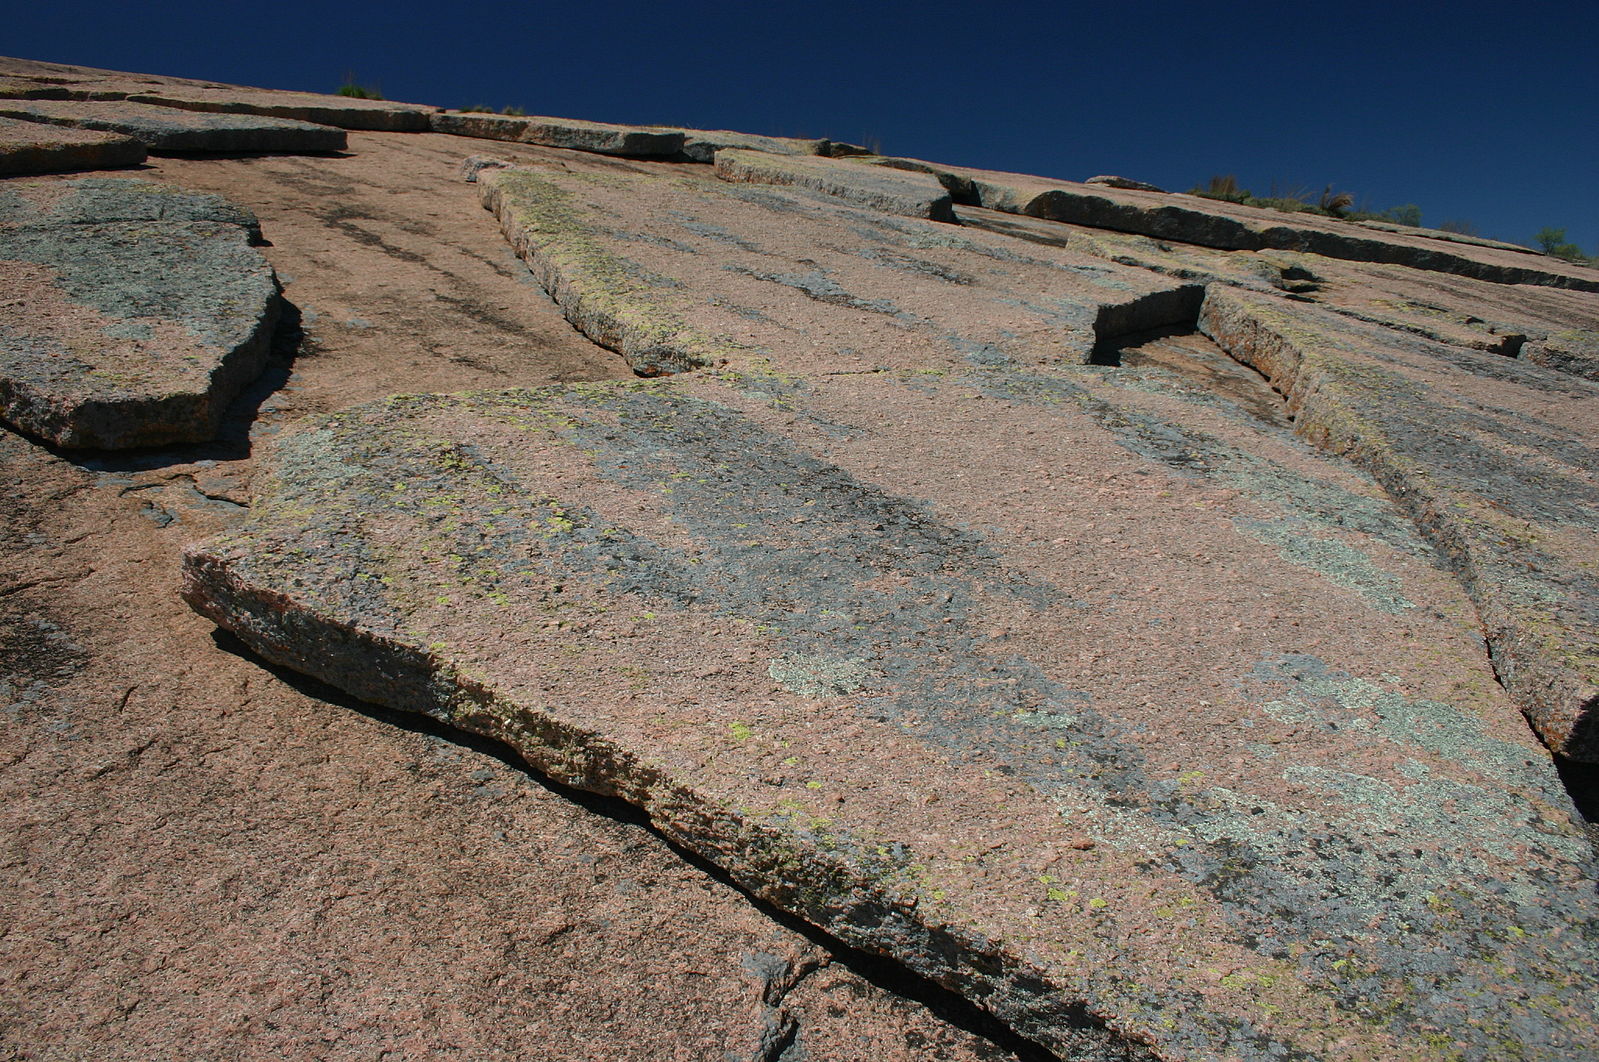 A layer of broken slabs of rock lying on top of a larger landscape of domed rock. The rocks are reddish-tan and gray.